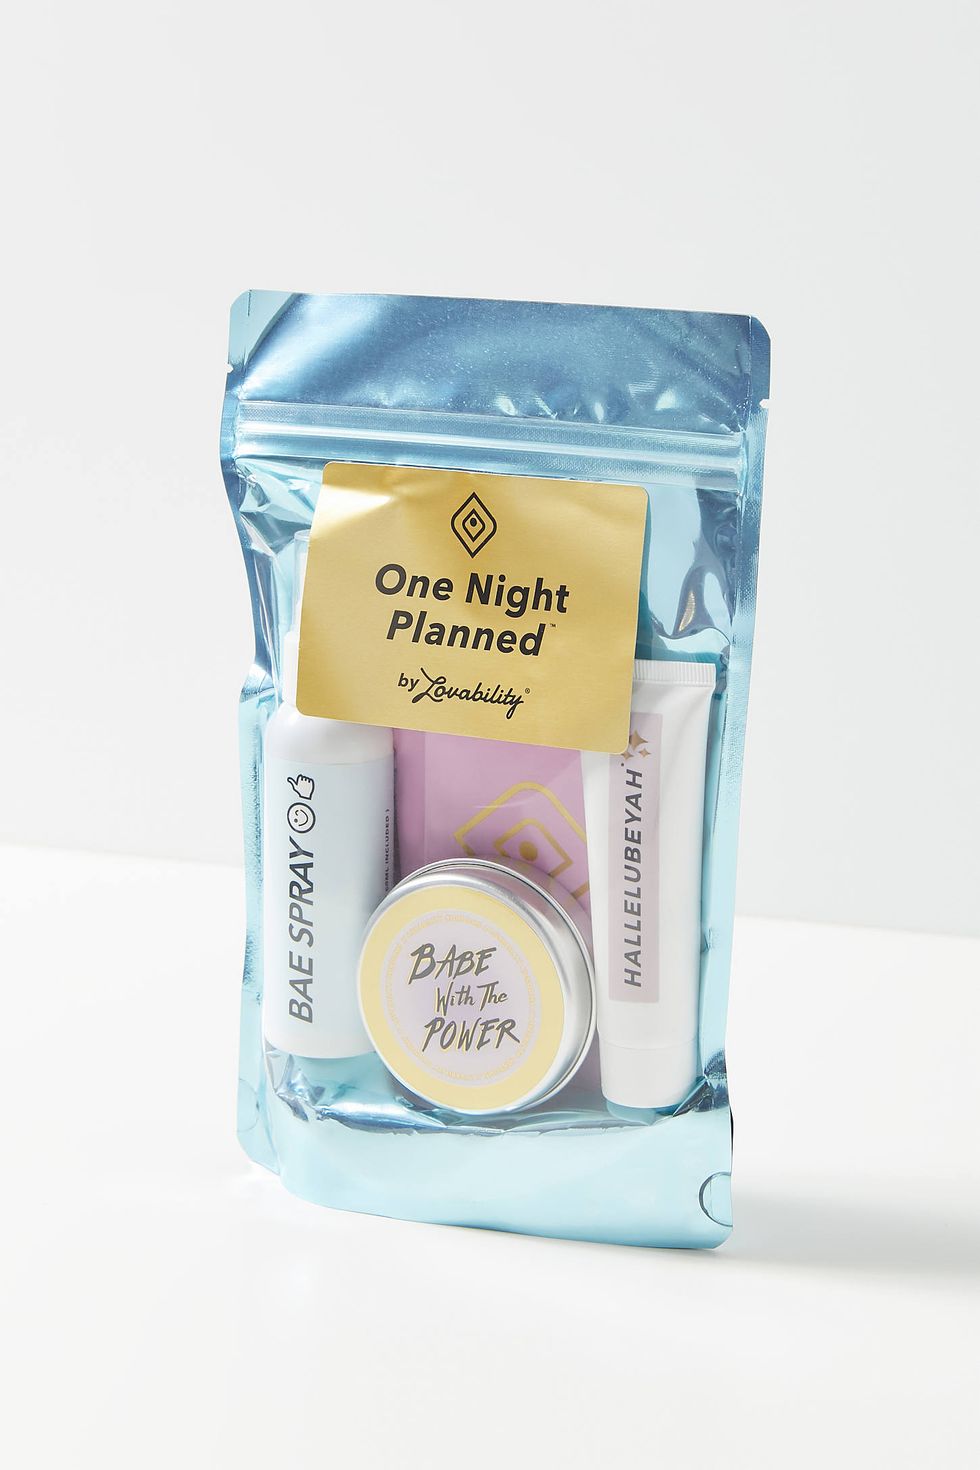 Lovability Exclusive One Night Planned Gift Set